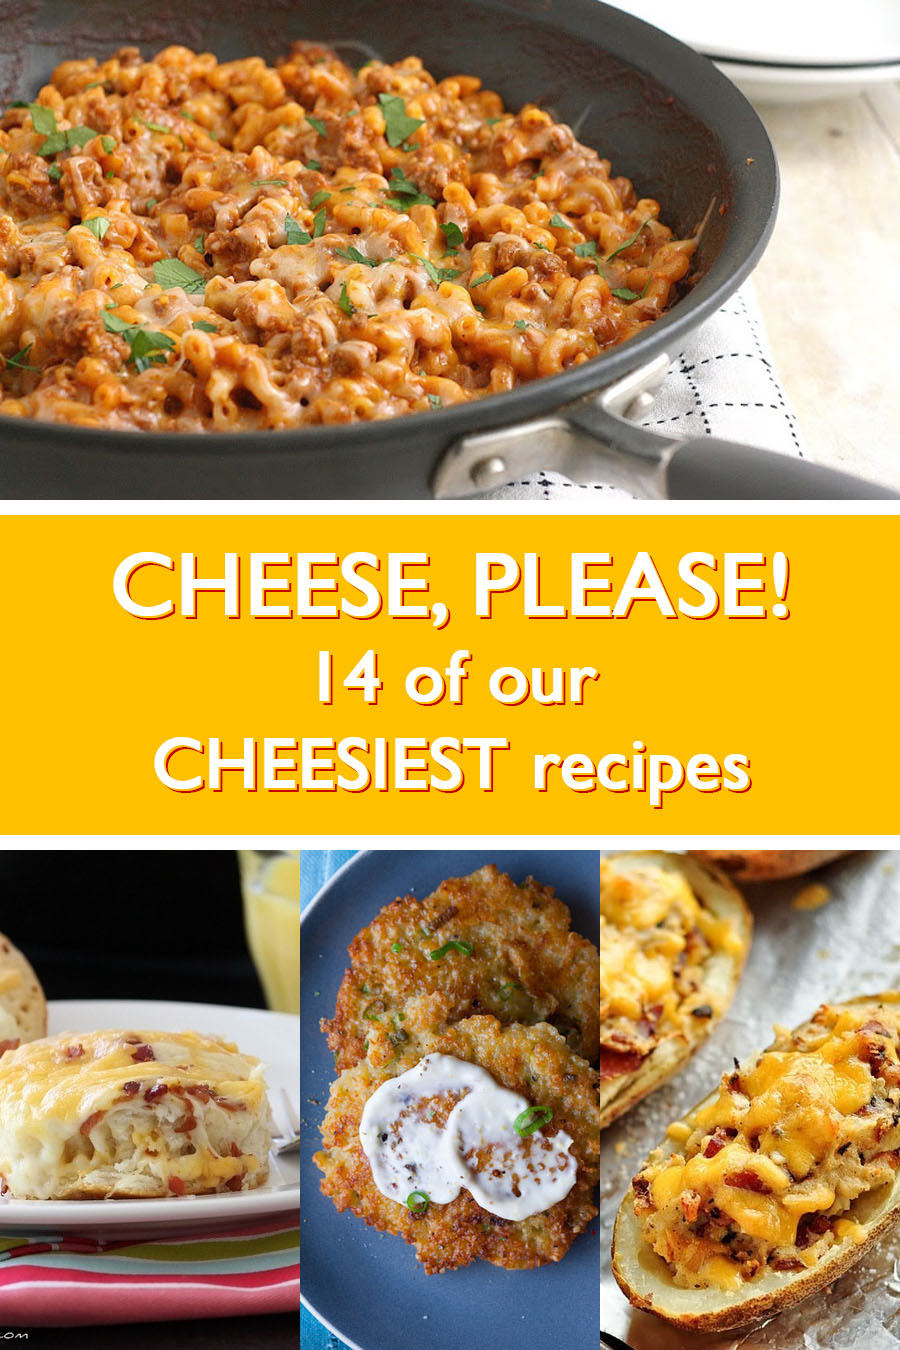 Cheese, please! 14 of our cheesiest recipes